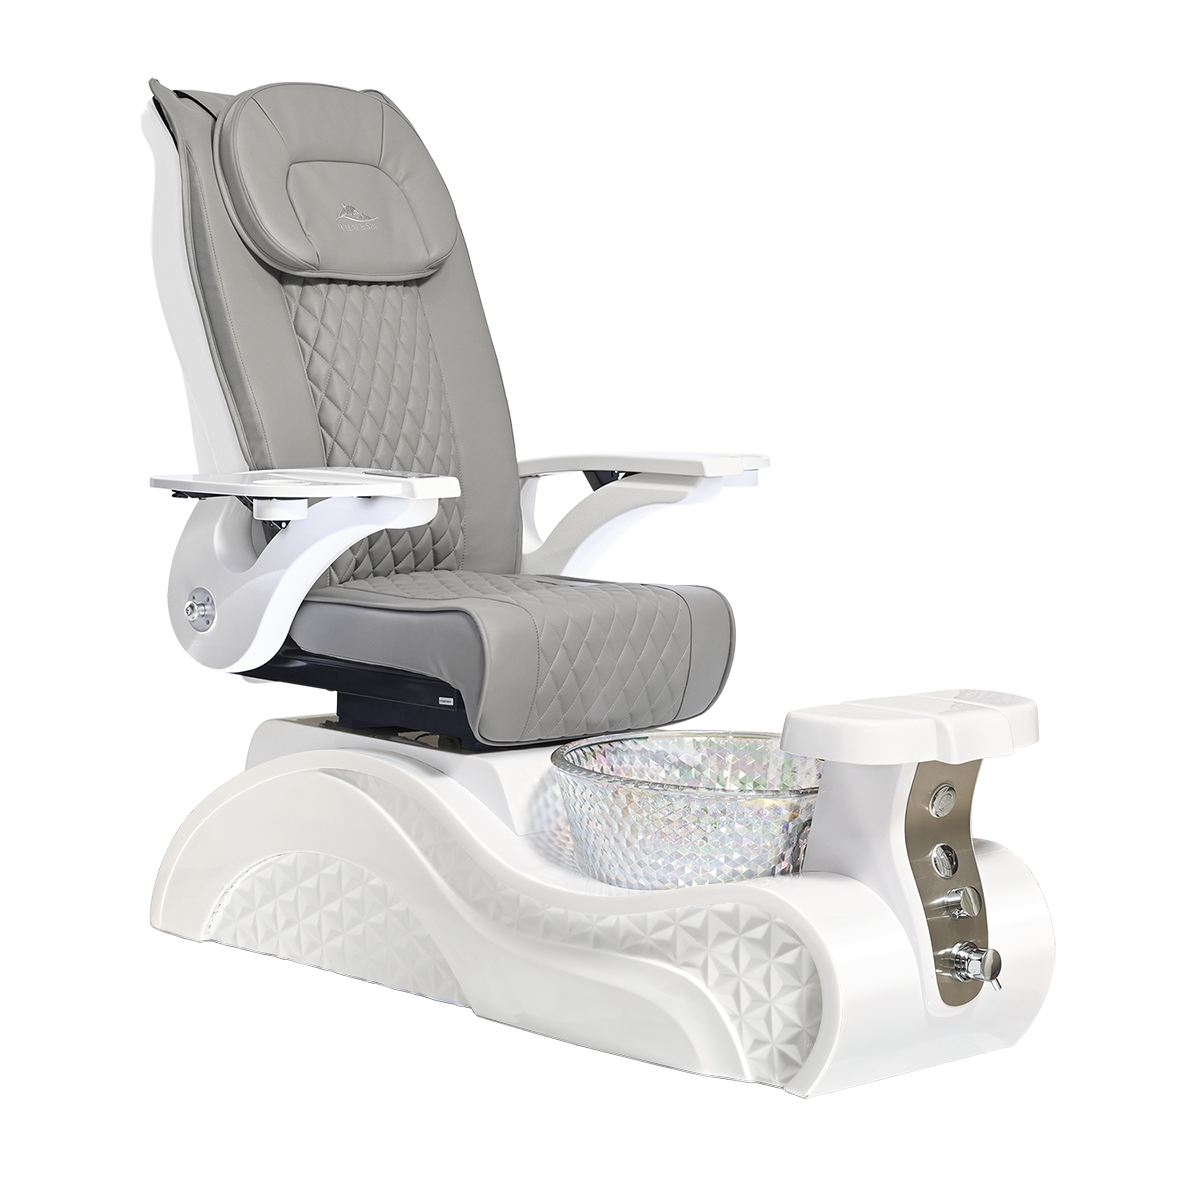 Lucent II Pedicure Chair